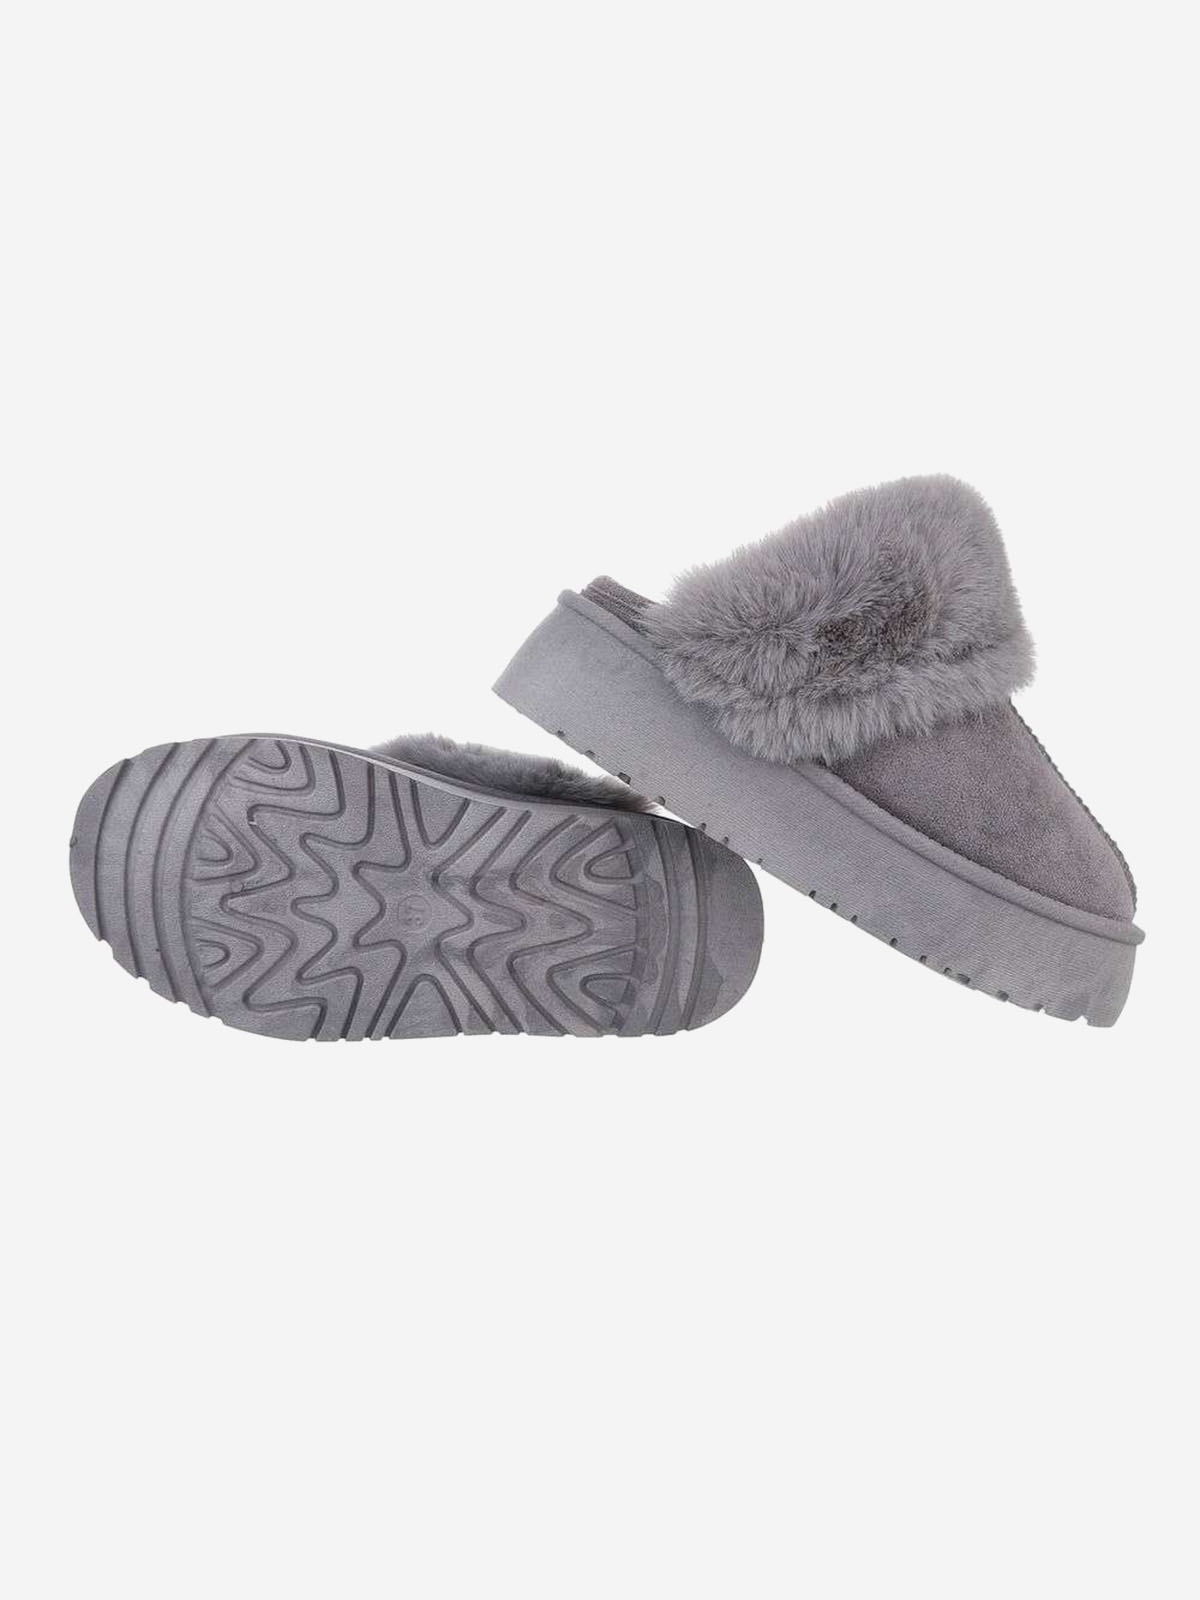 UGG type women's slippers with platform in grey